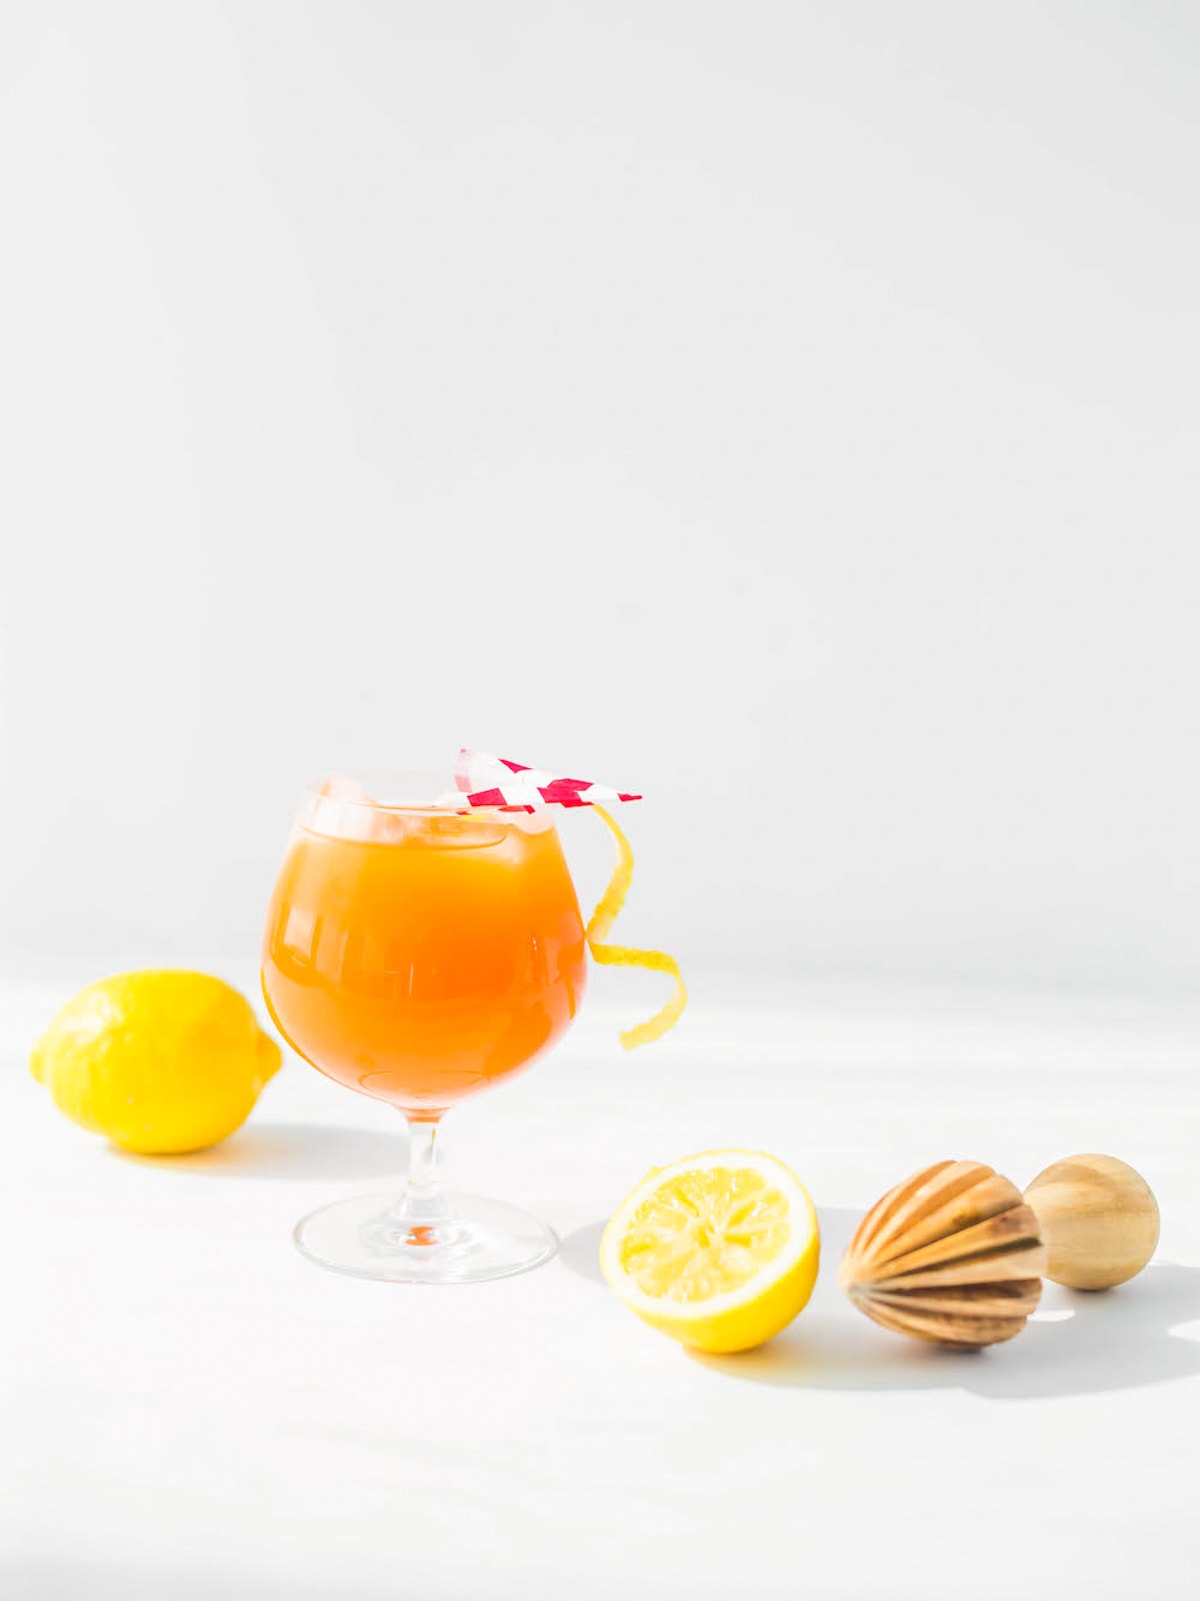 Paper Plane Spritz by Ashley Rose of Sugar & Cloth, a top lifestyle blog in Houston, Texas